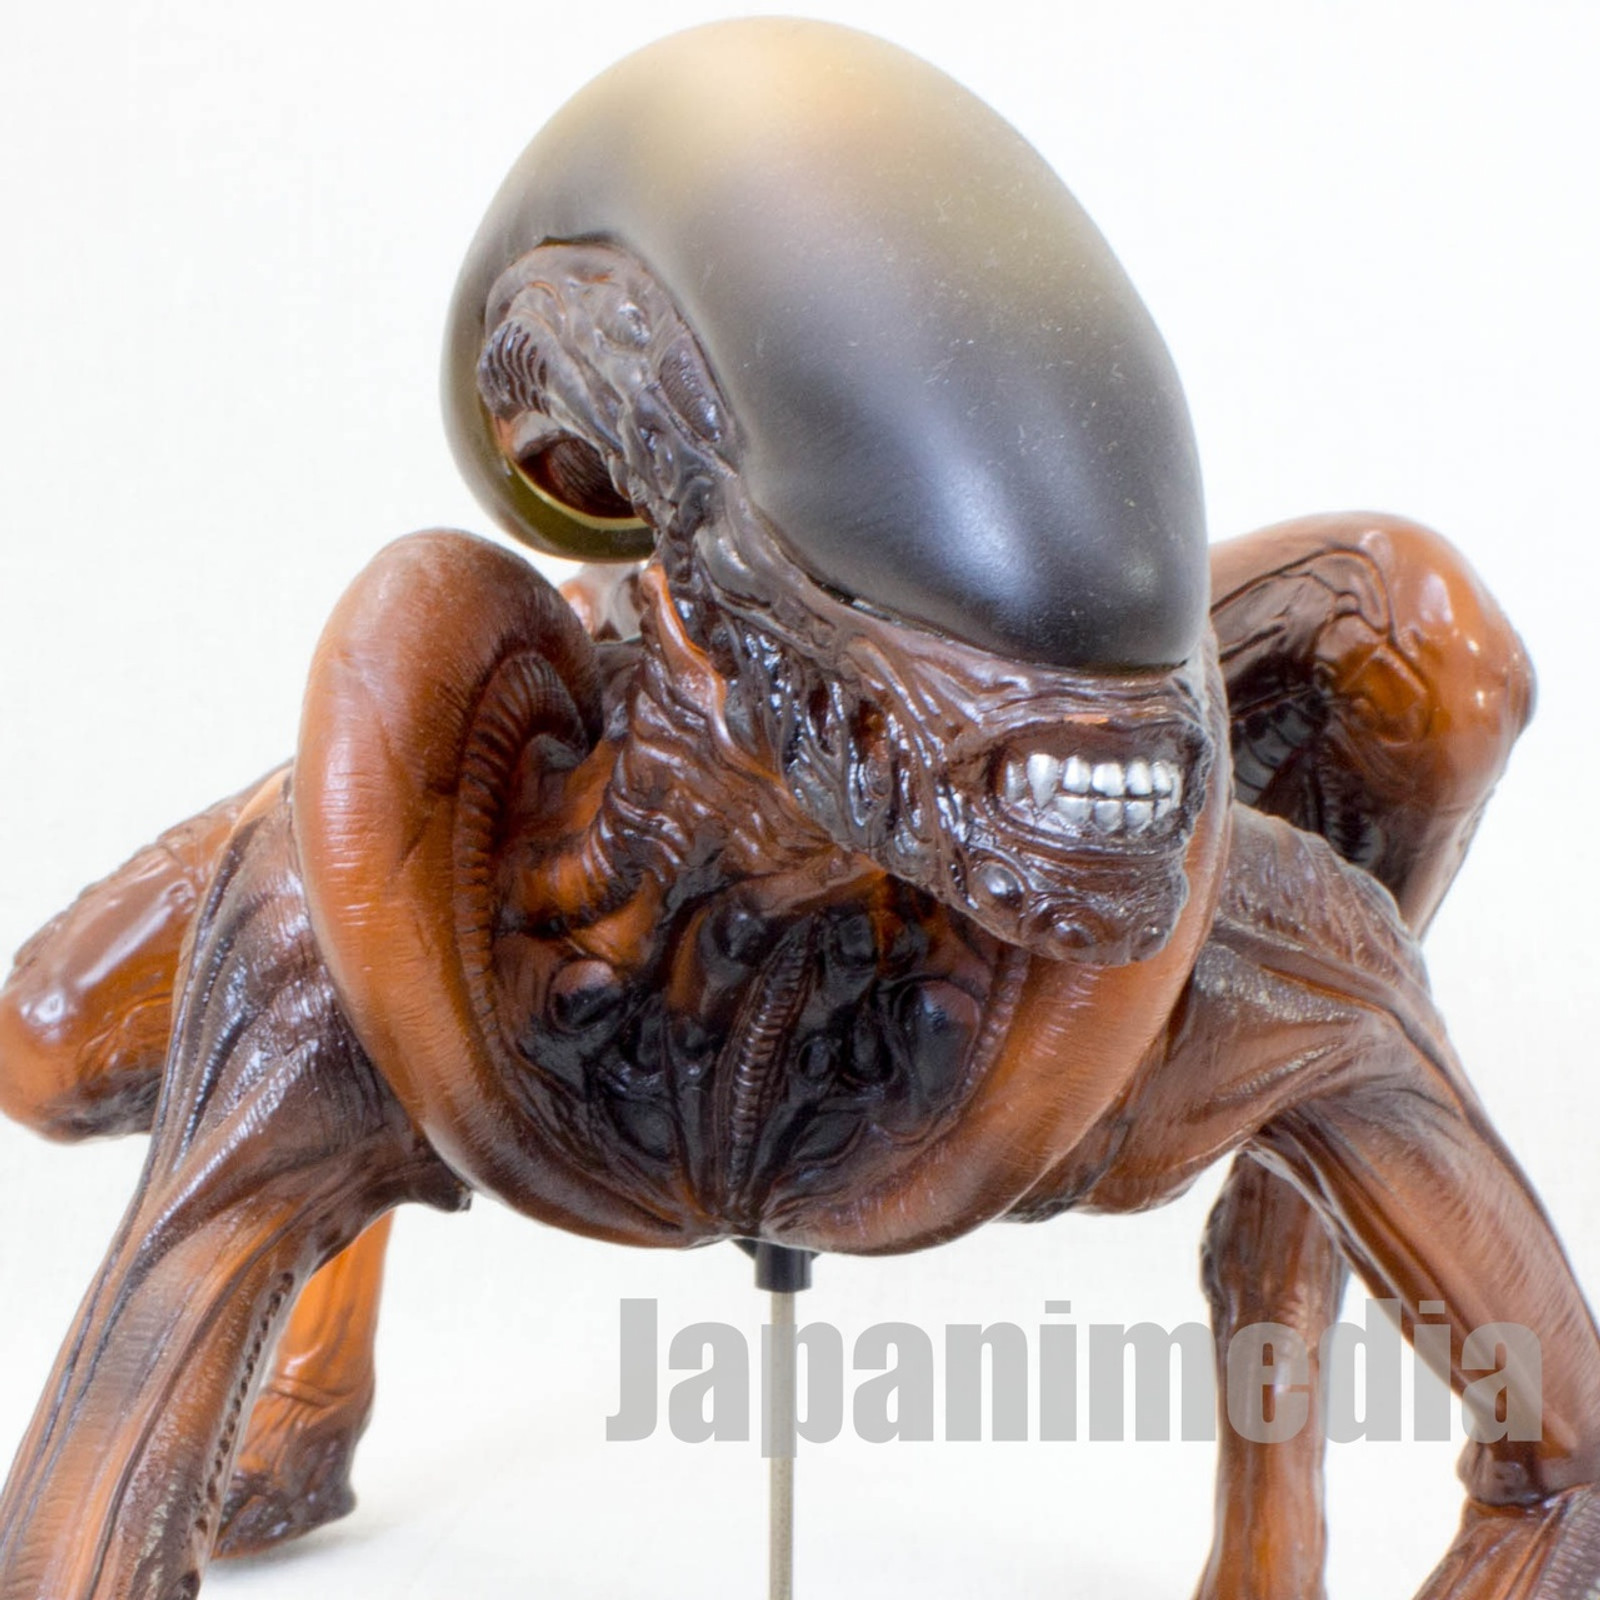 Alien 3 Creature Figure 1/5 Scale PVC Completed Model Tsukuda Hobby SVM-41 JAPAN